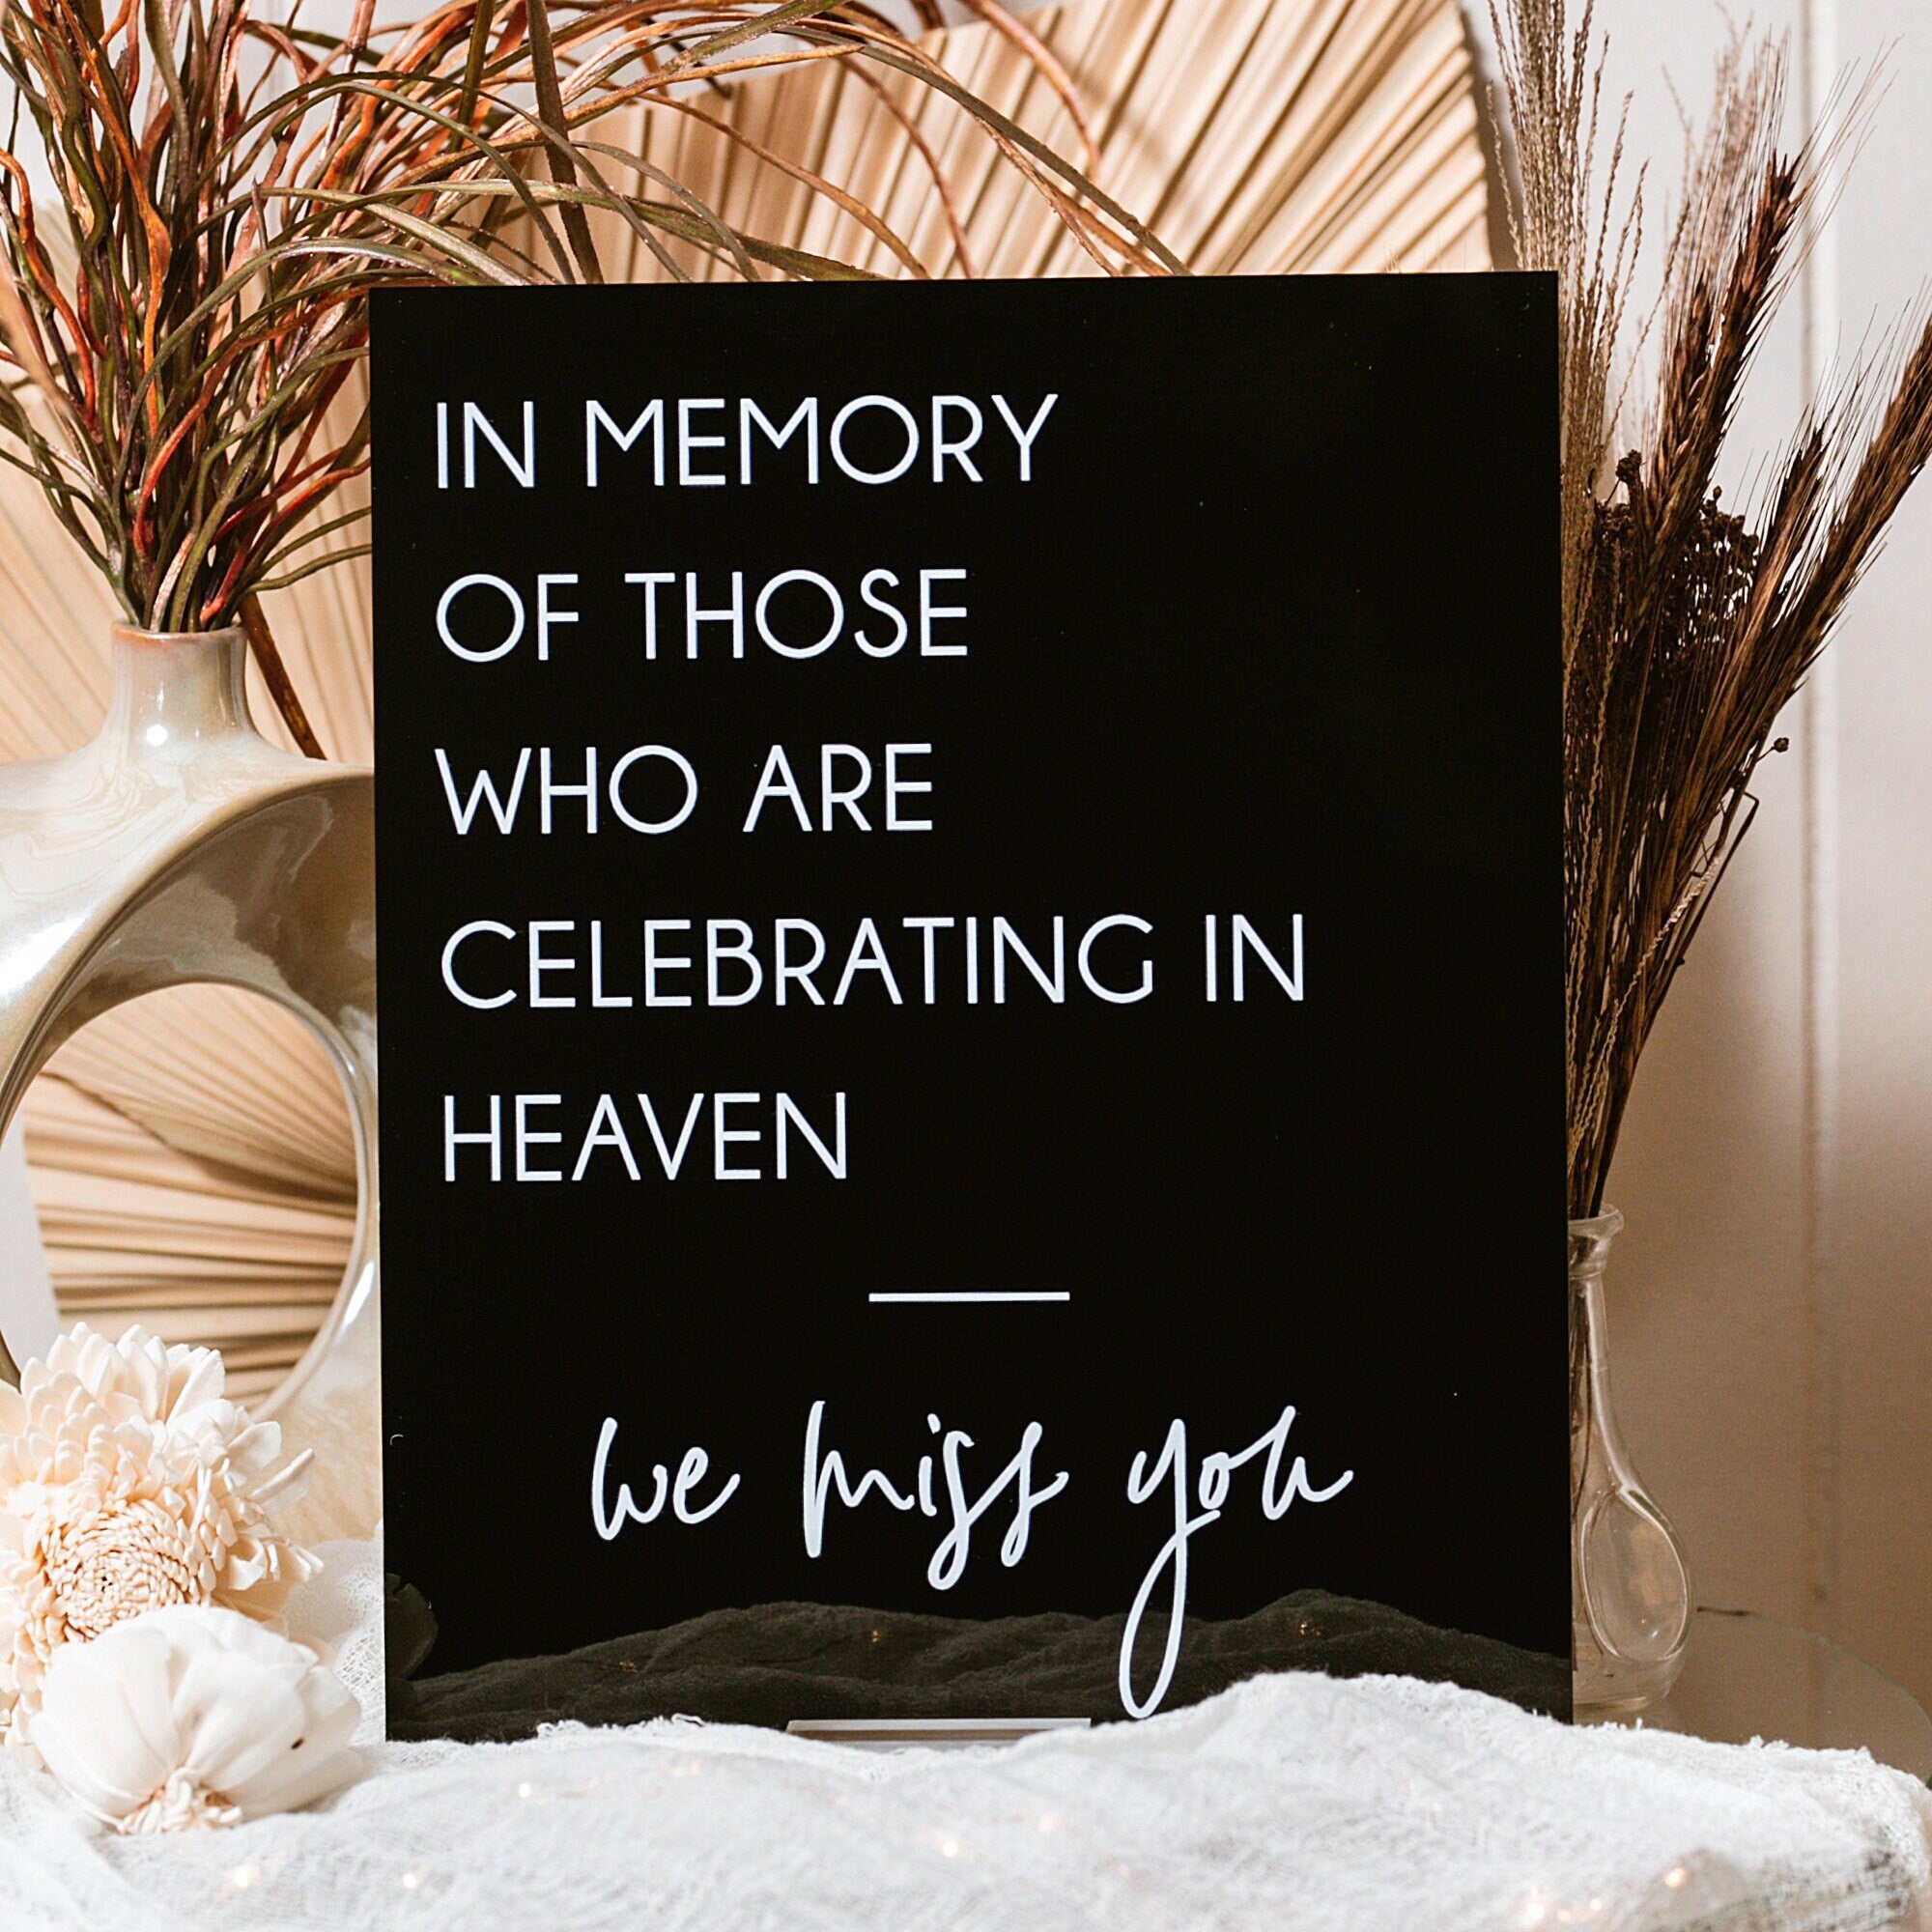 In Loving Memory Of Those Who Are Celebrating In Heaven S3-MS9